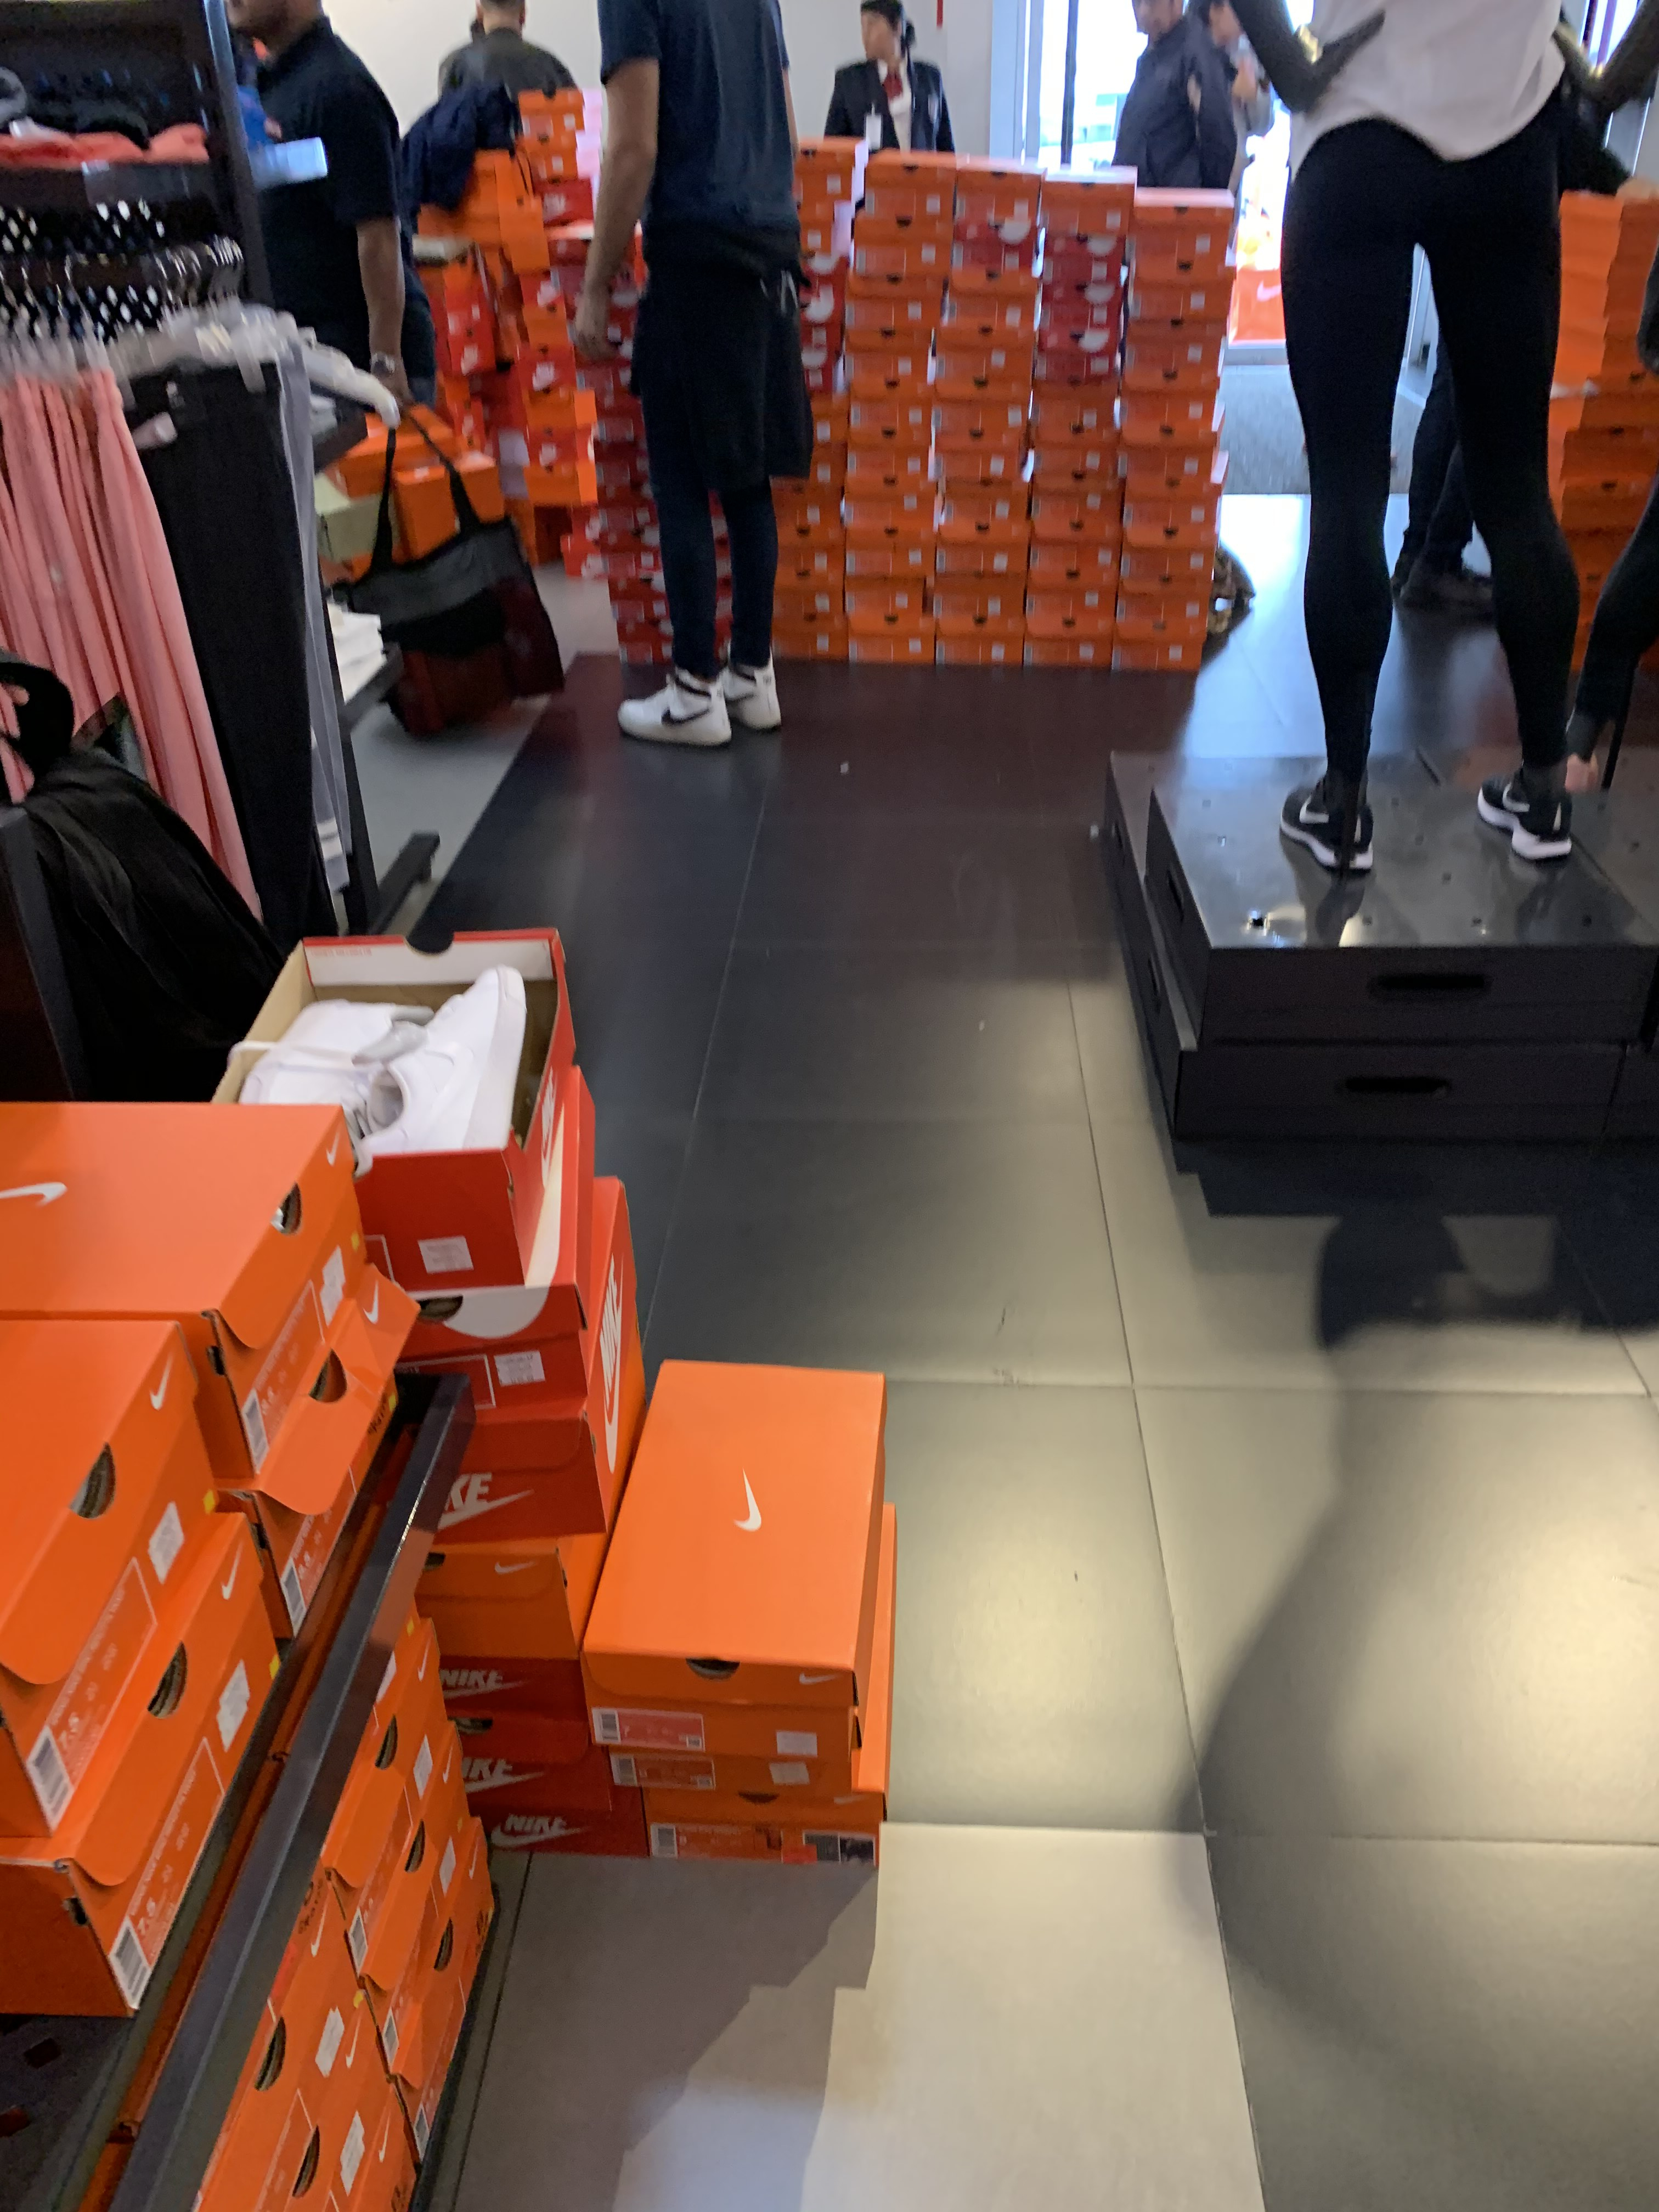 promodescuentos nike factory store